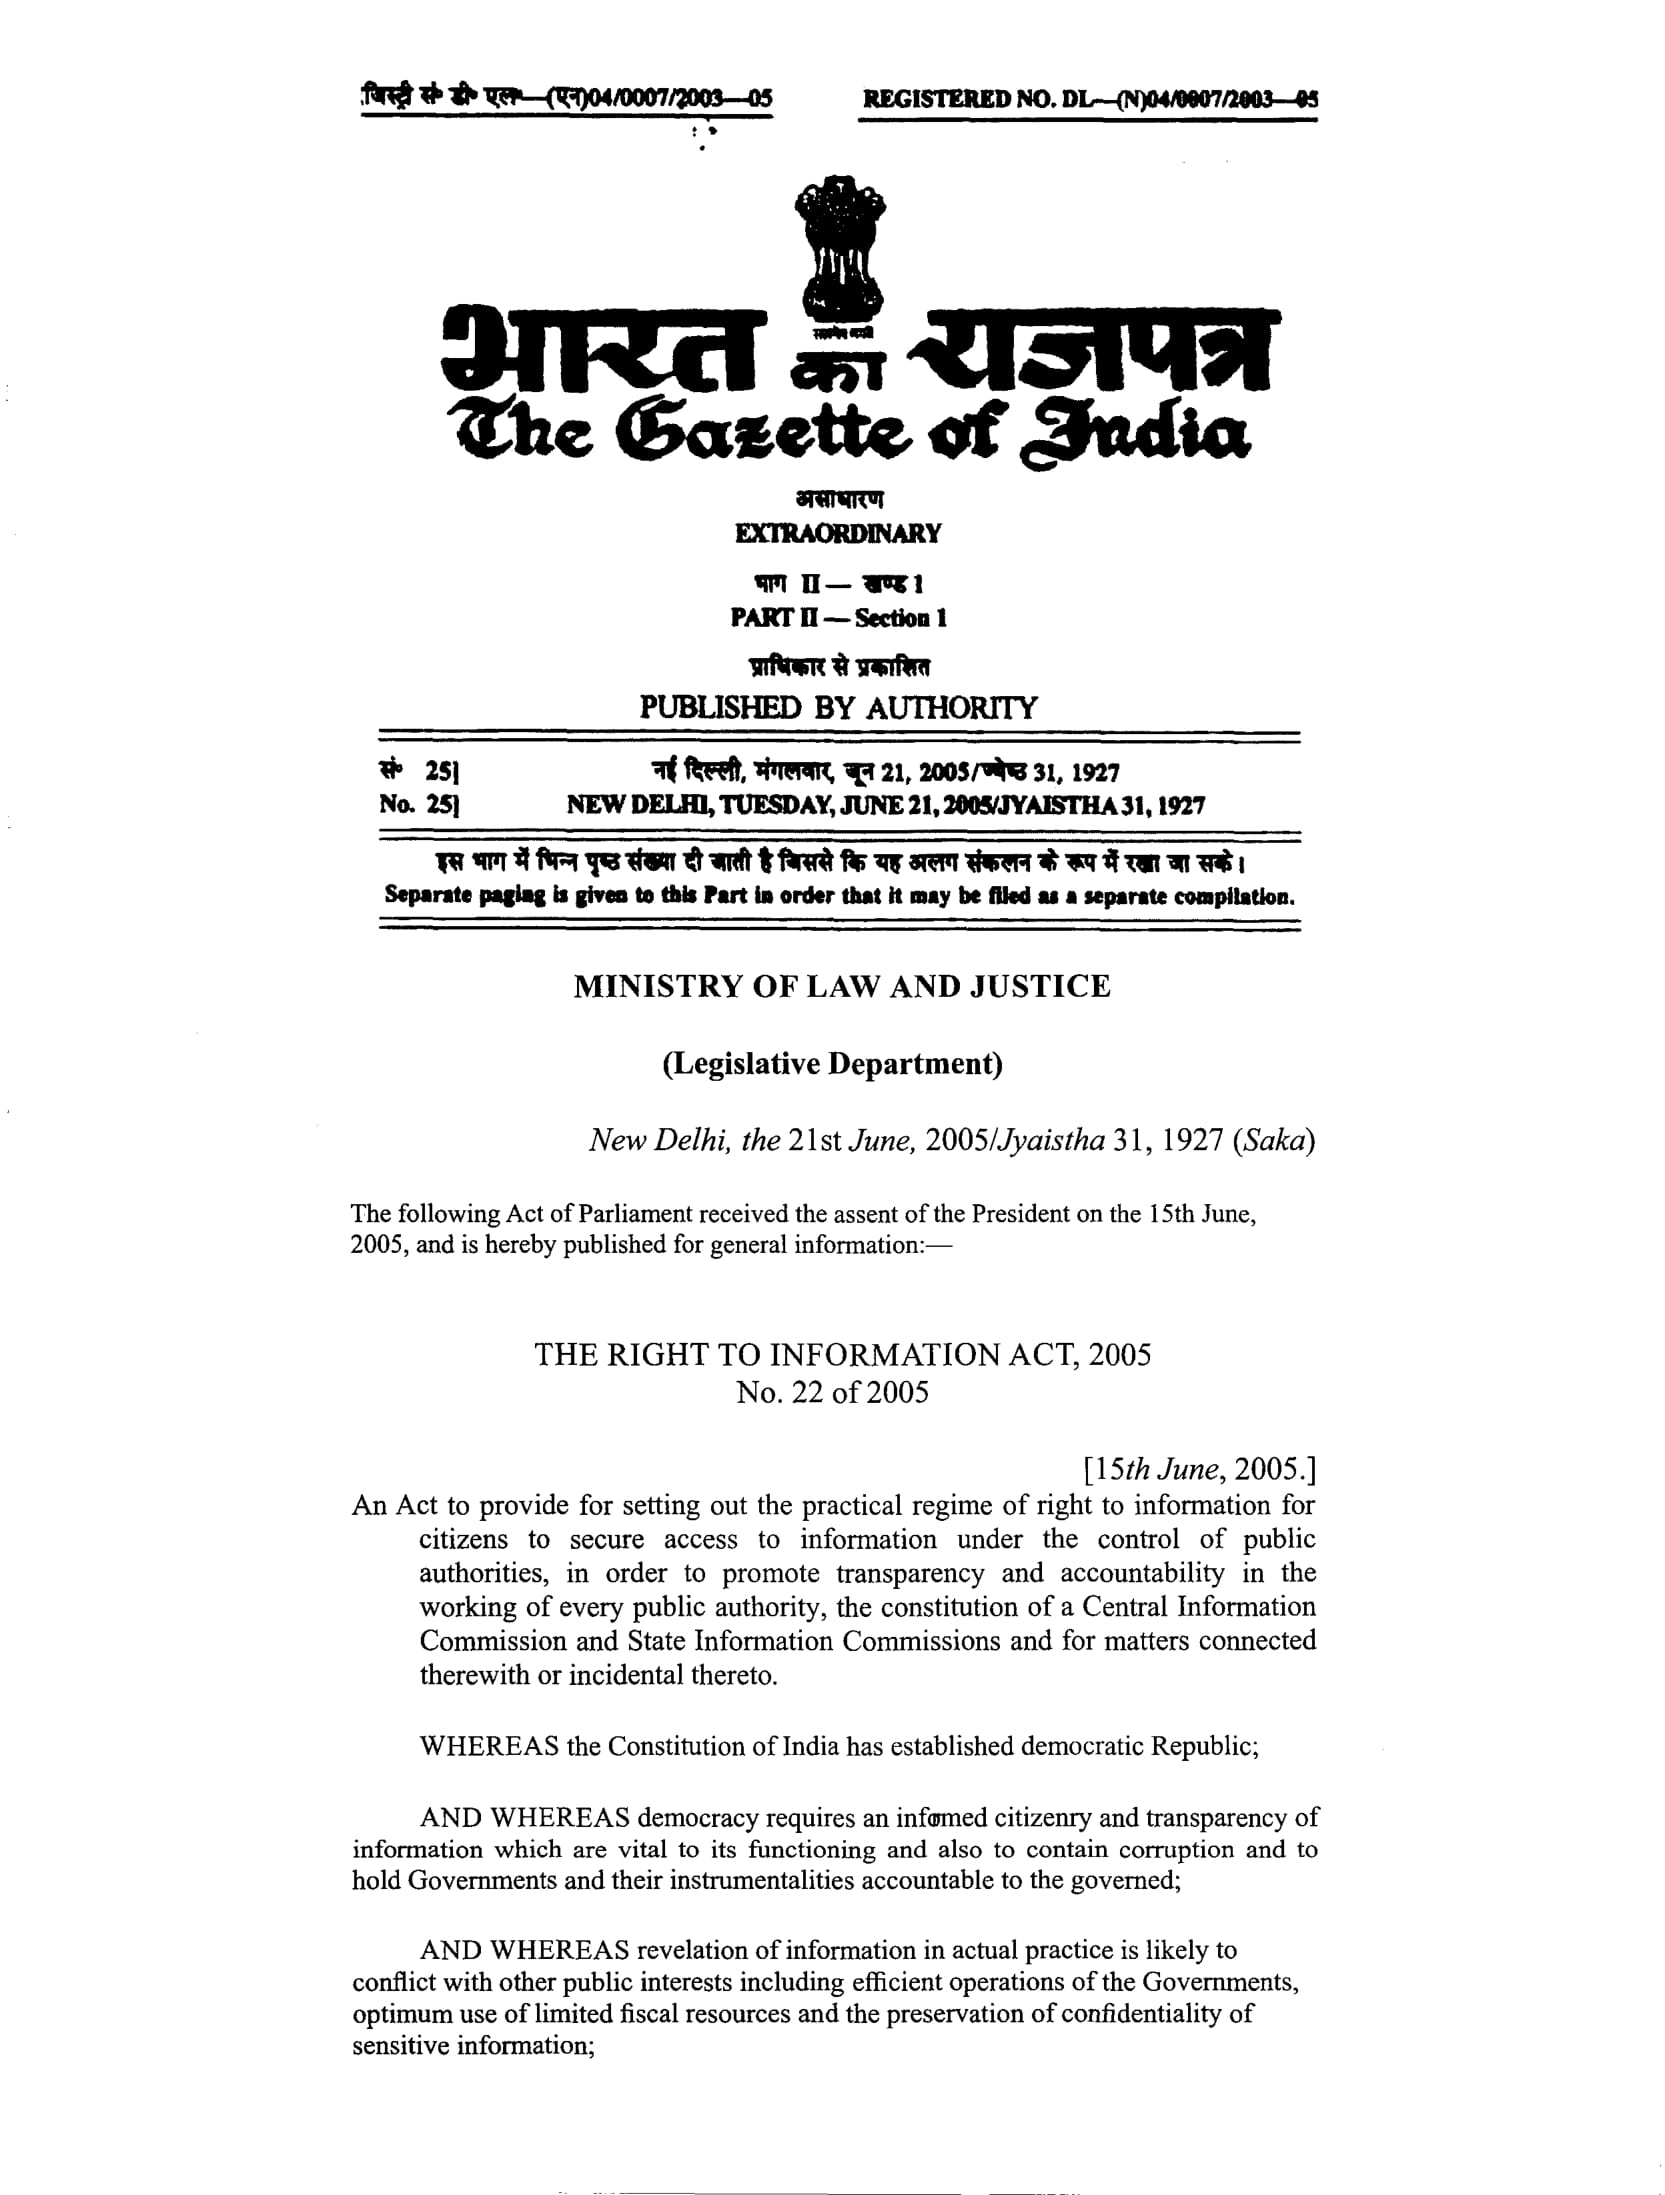 RTI Act 2005 - Right to Information Act PDF-01